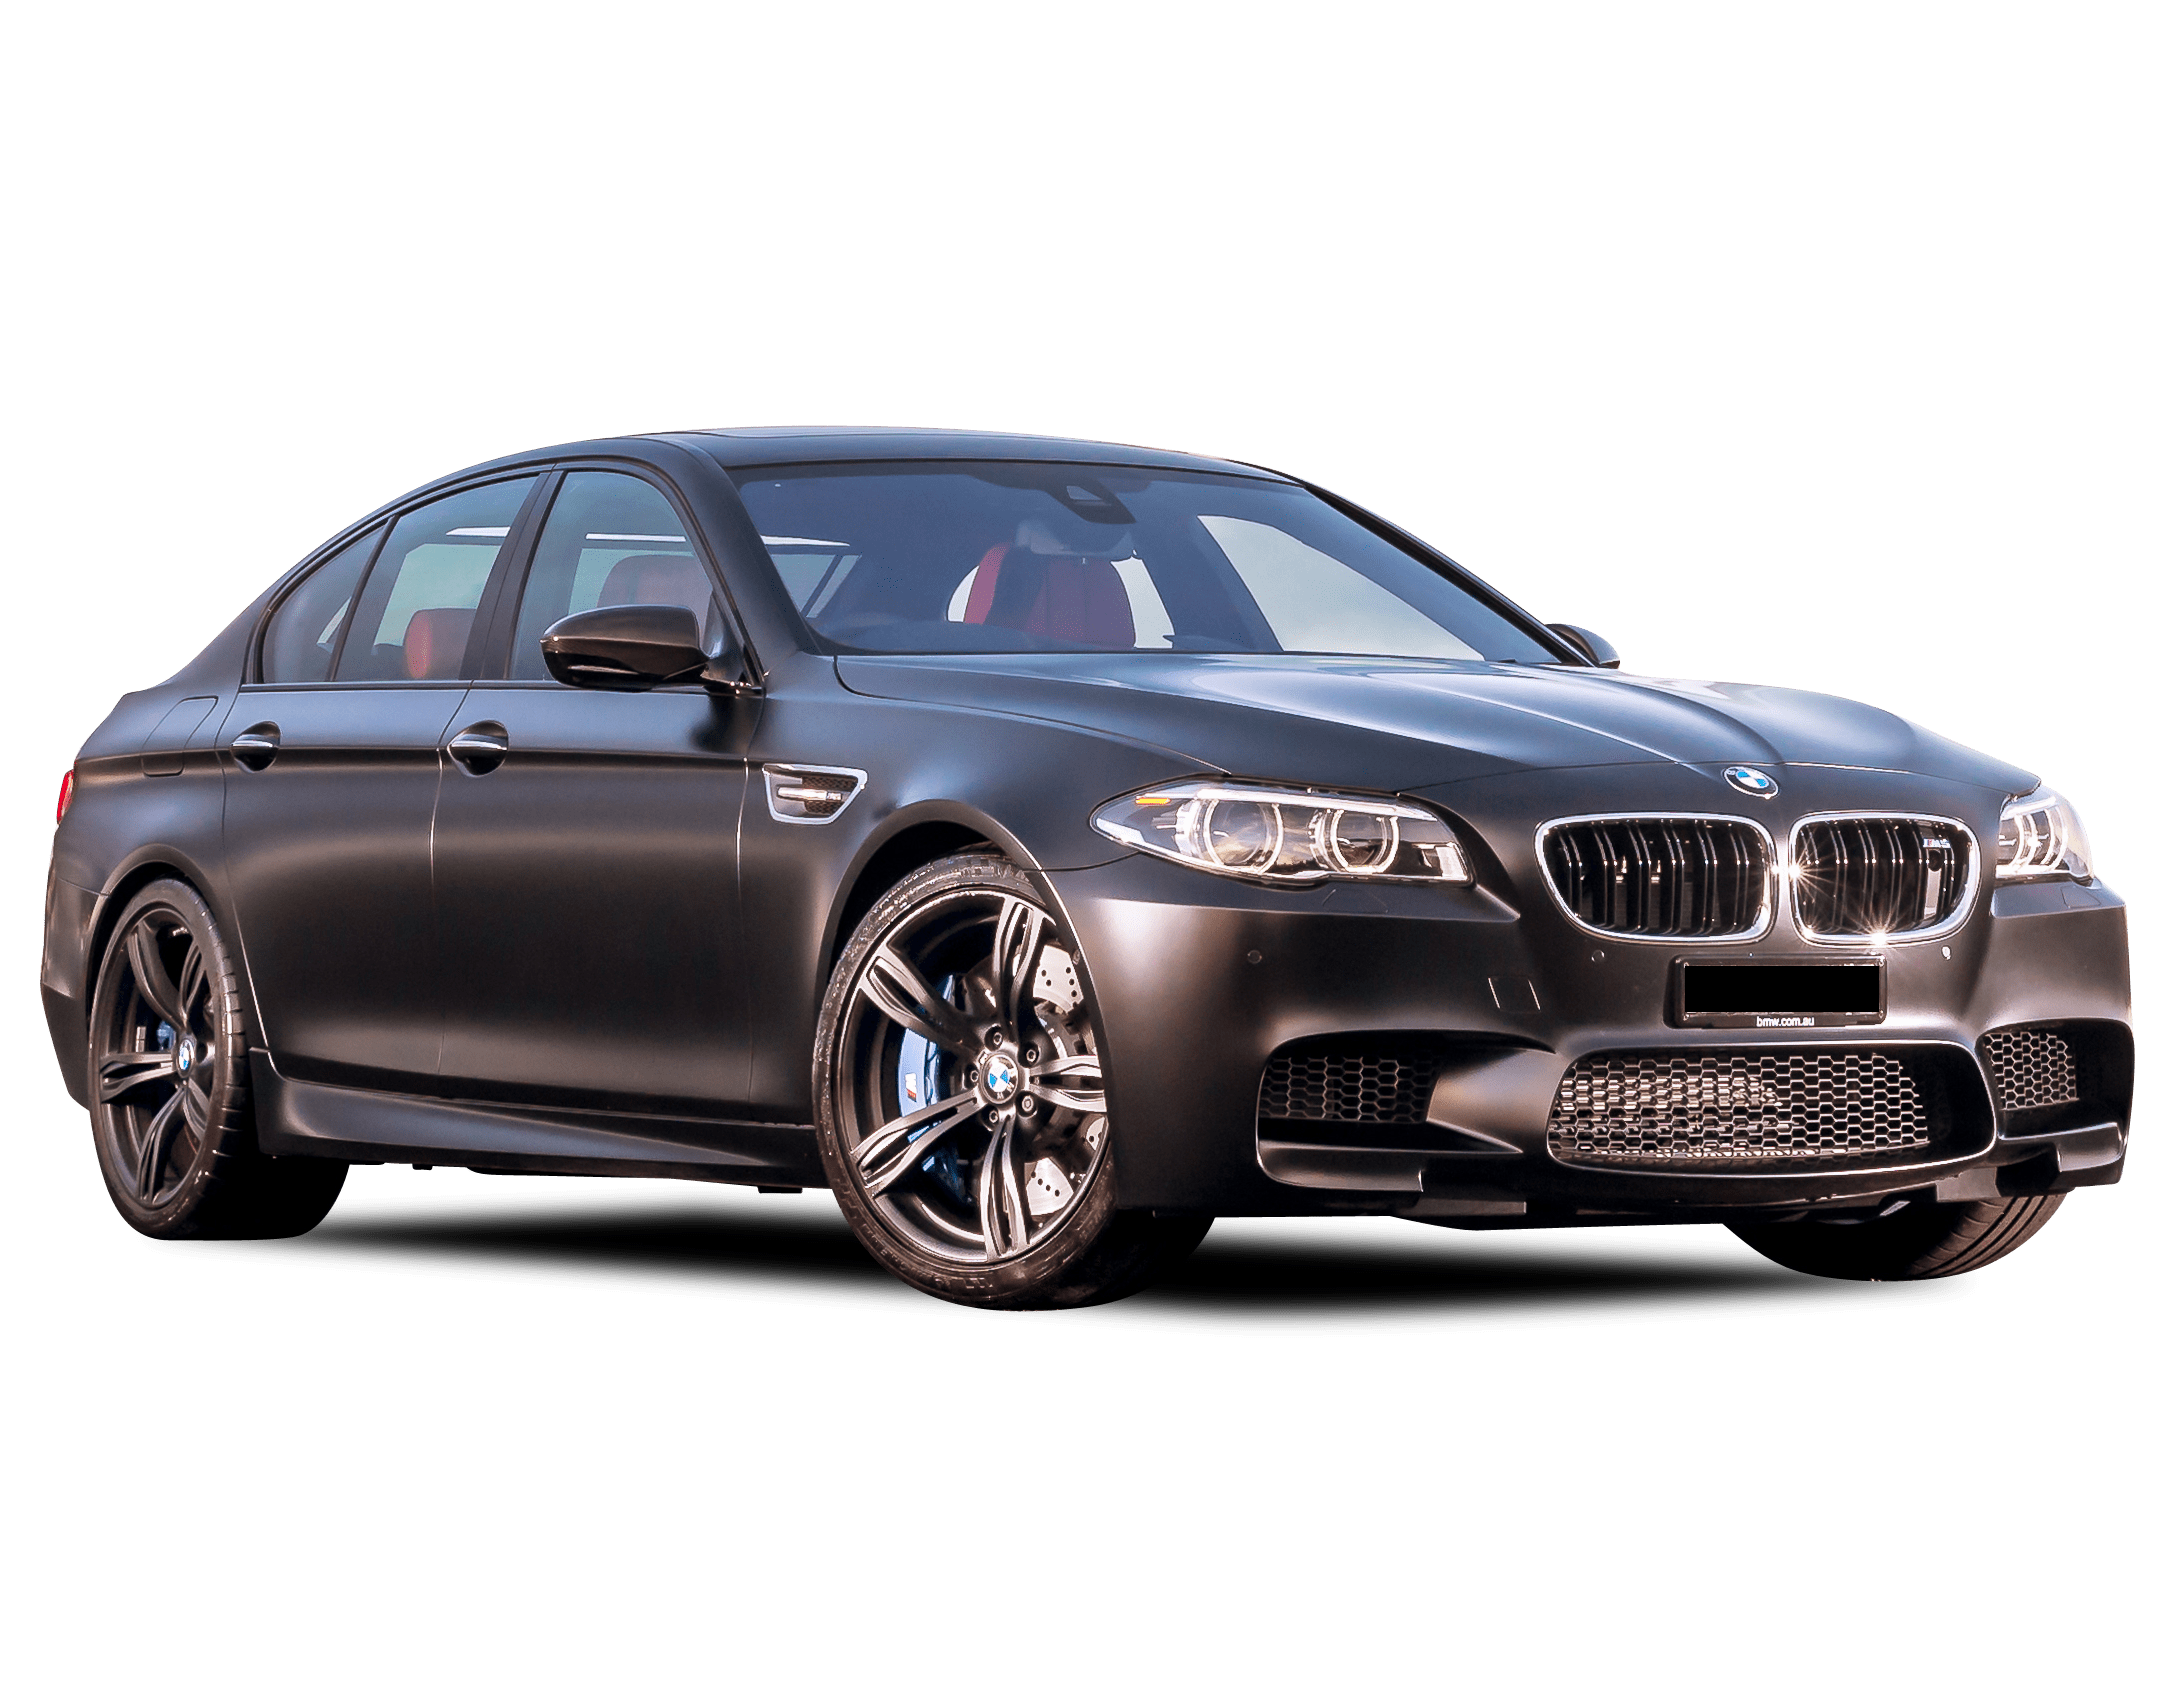 In-Depth Review: BMW M5 E60